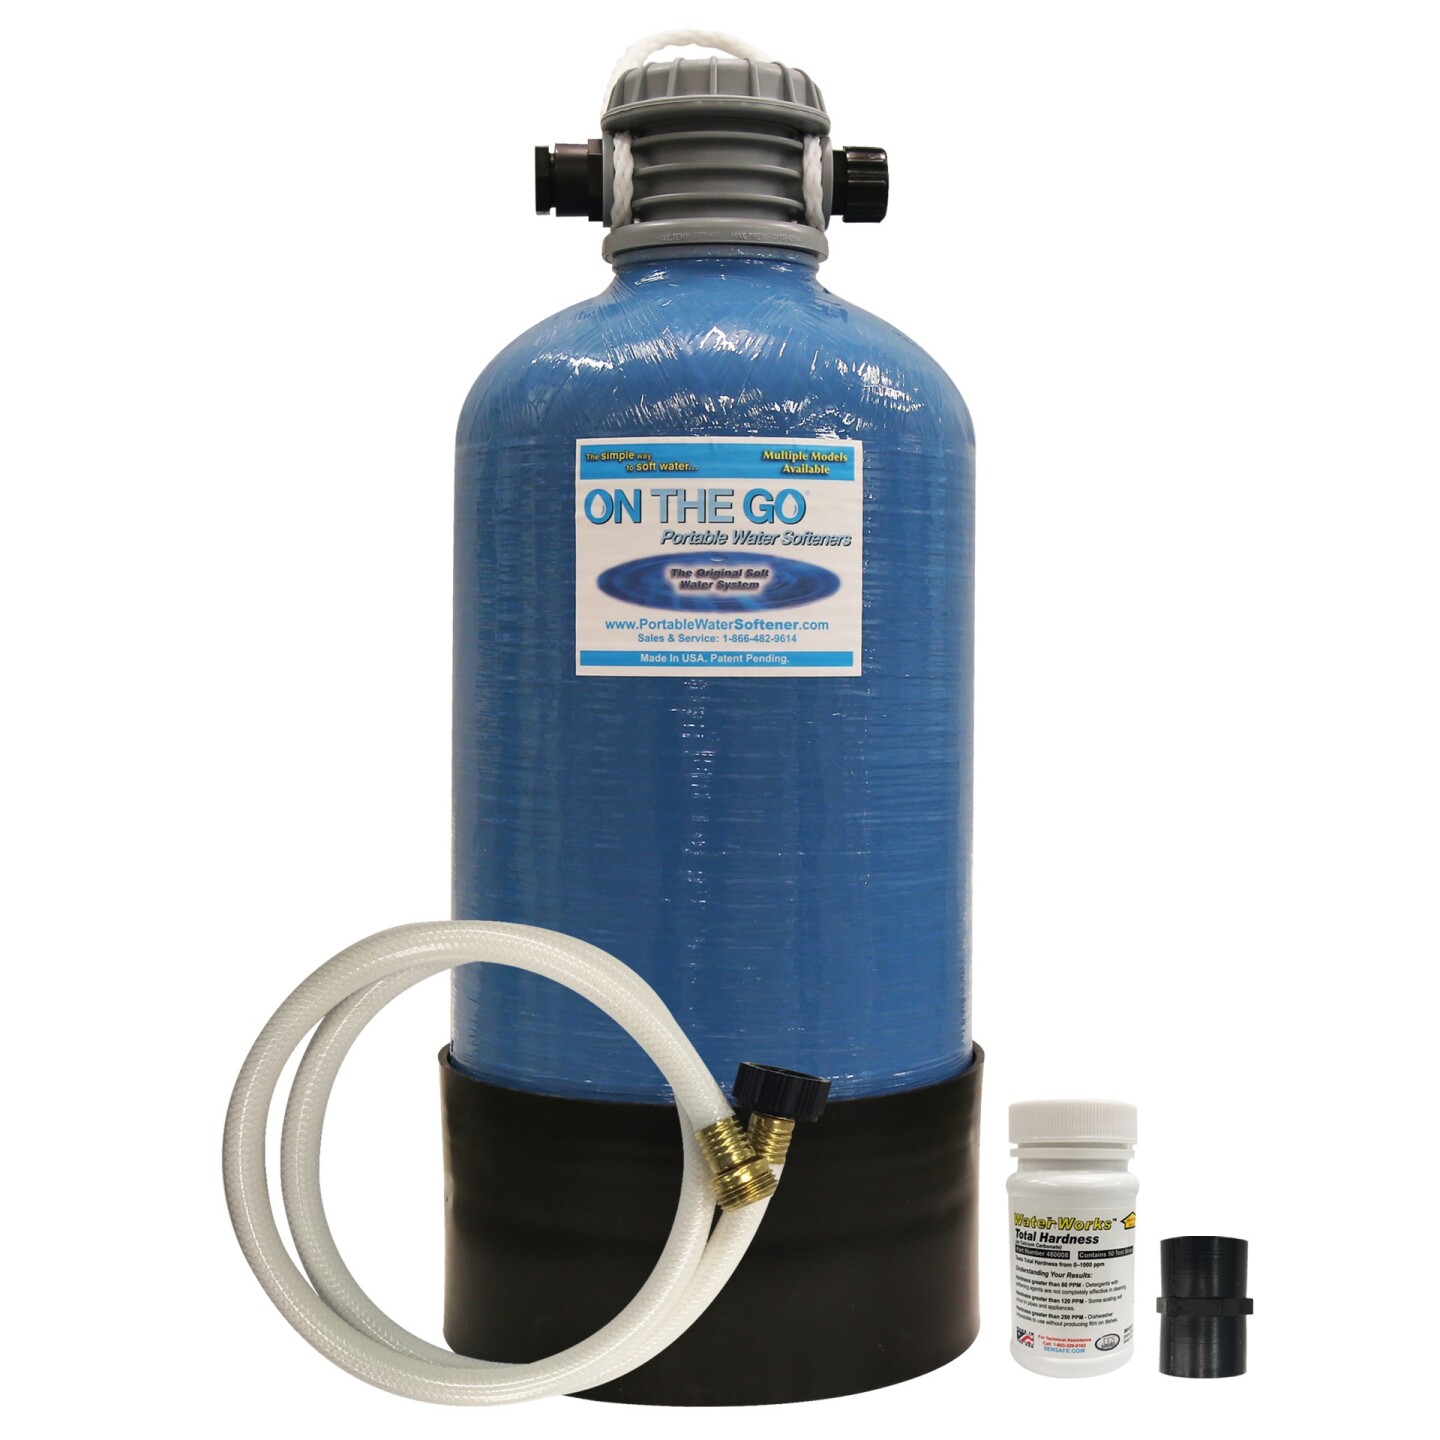 On The Go Portable Water Softener Regeneration Process 